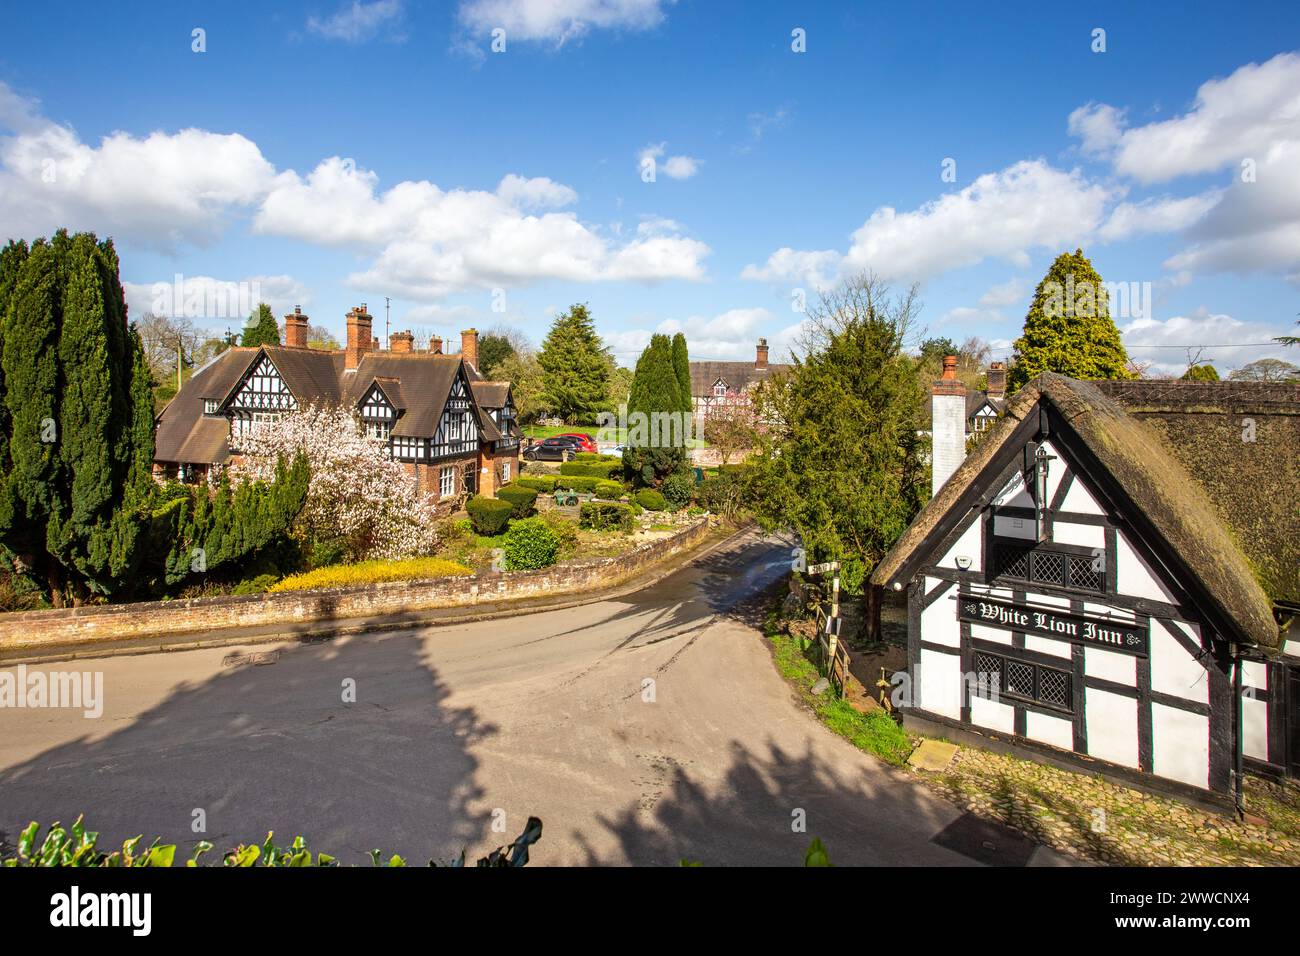 The White Lion a17th century black and white half timbered thatched roofed coaching inn in The Cheshire village of Barthomley Stock Photo